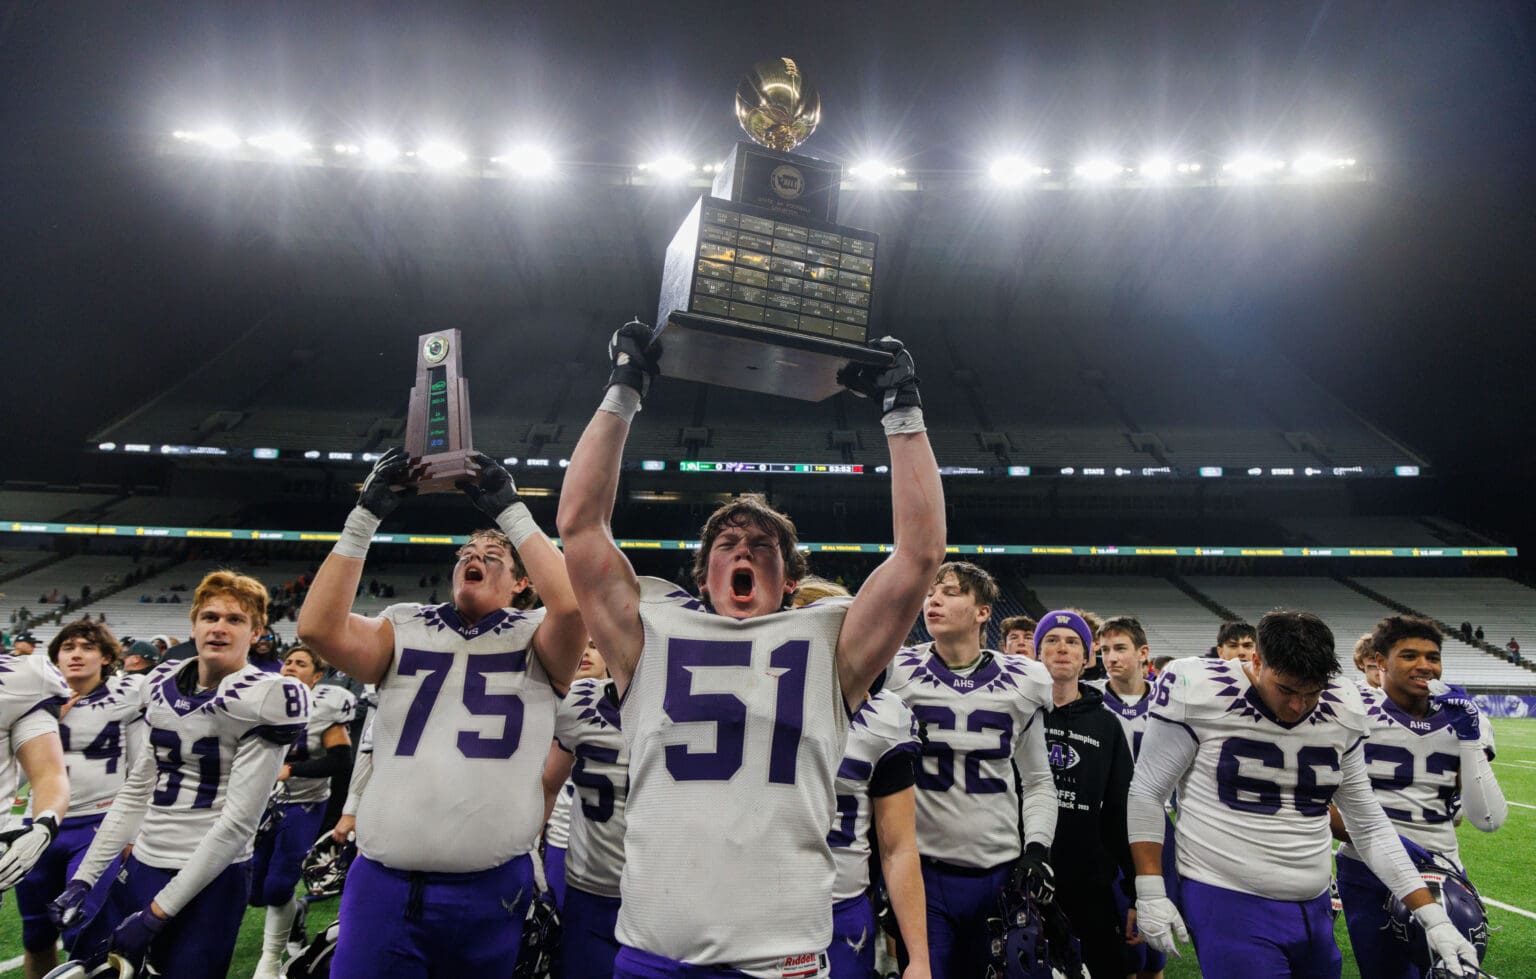 Anacortes celebrates winning its first-ever state title by raising the trophies above them.